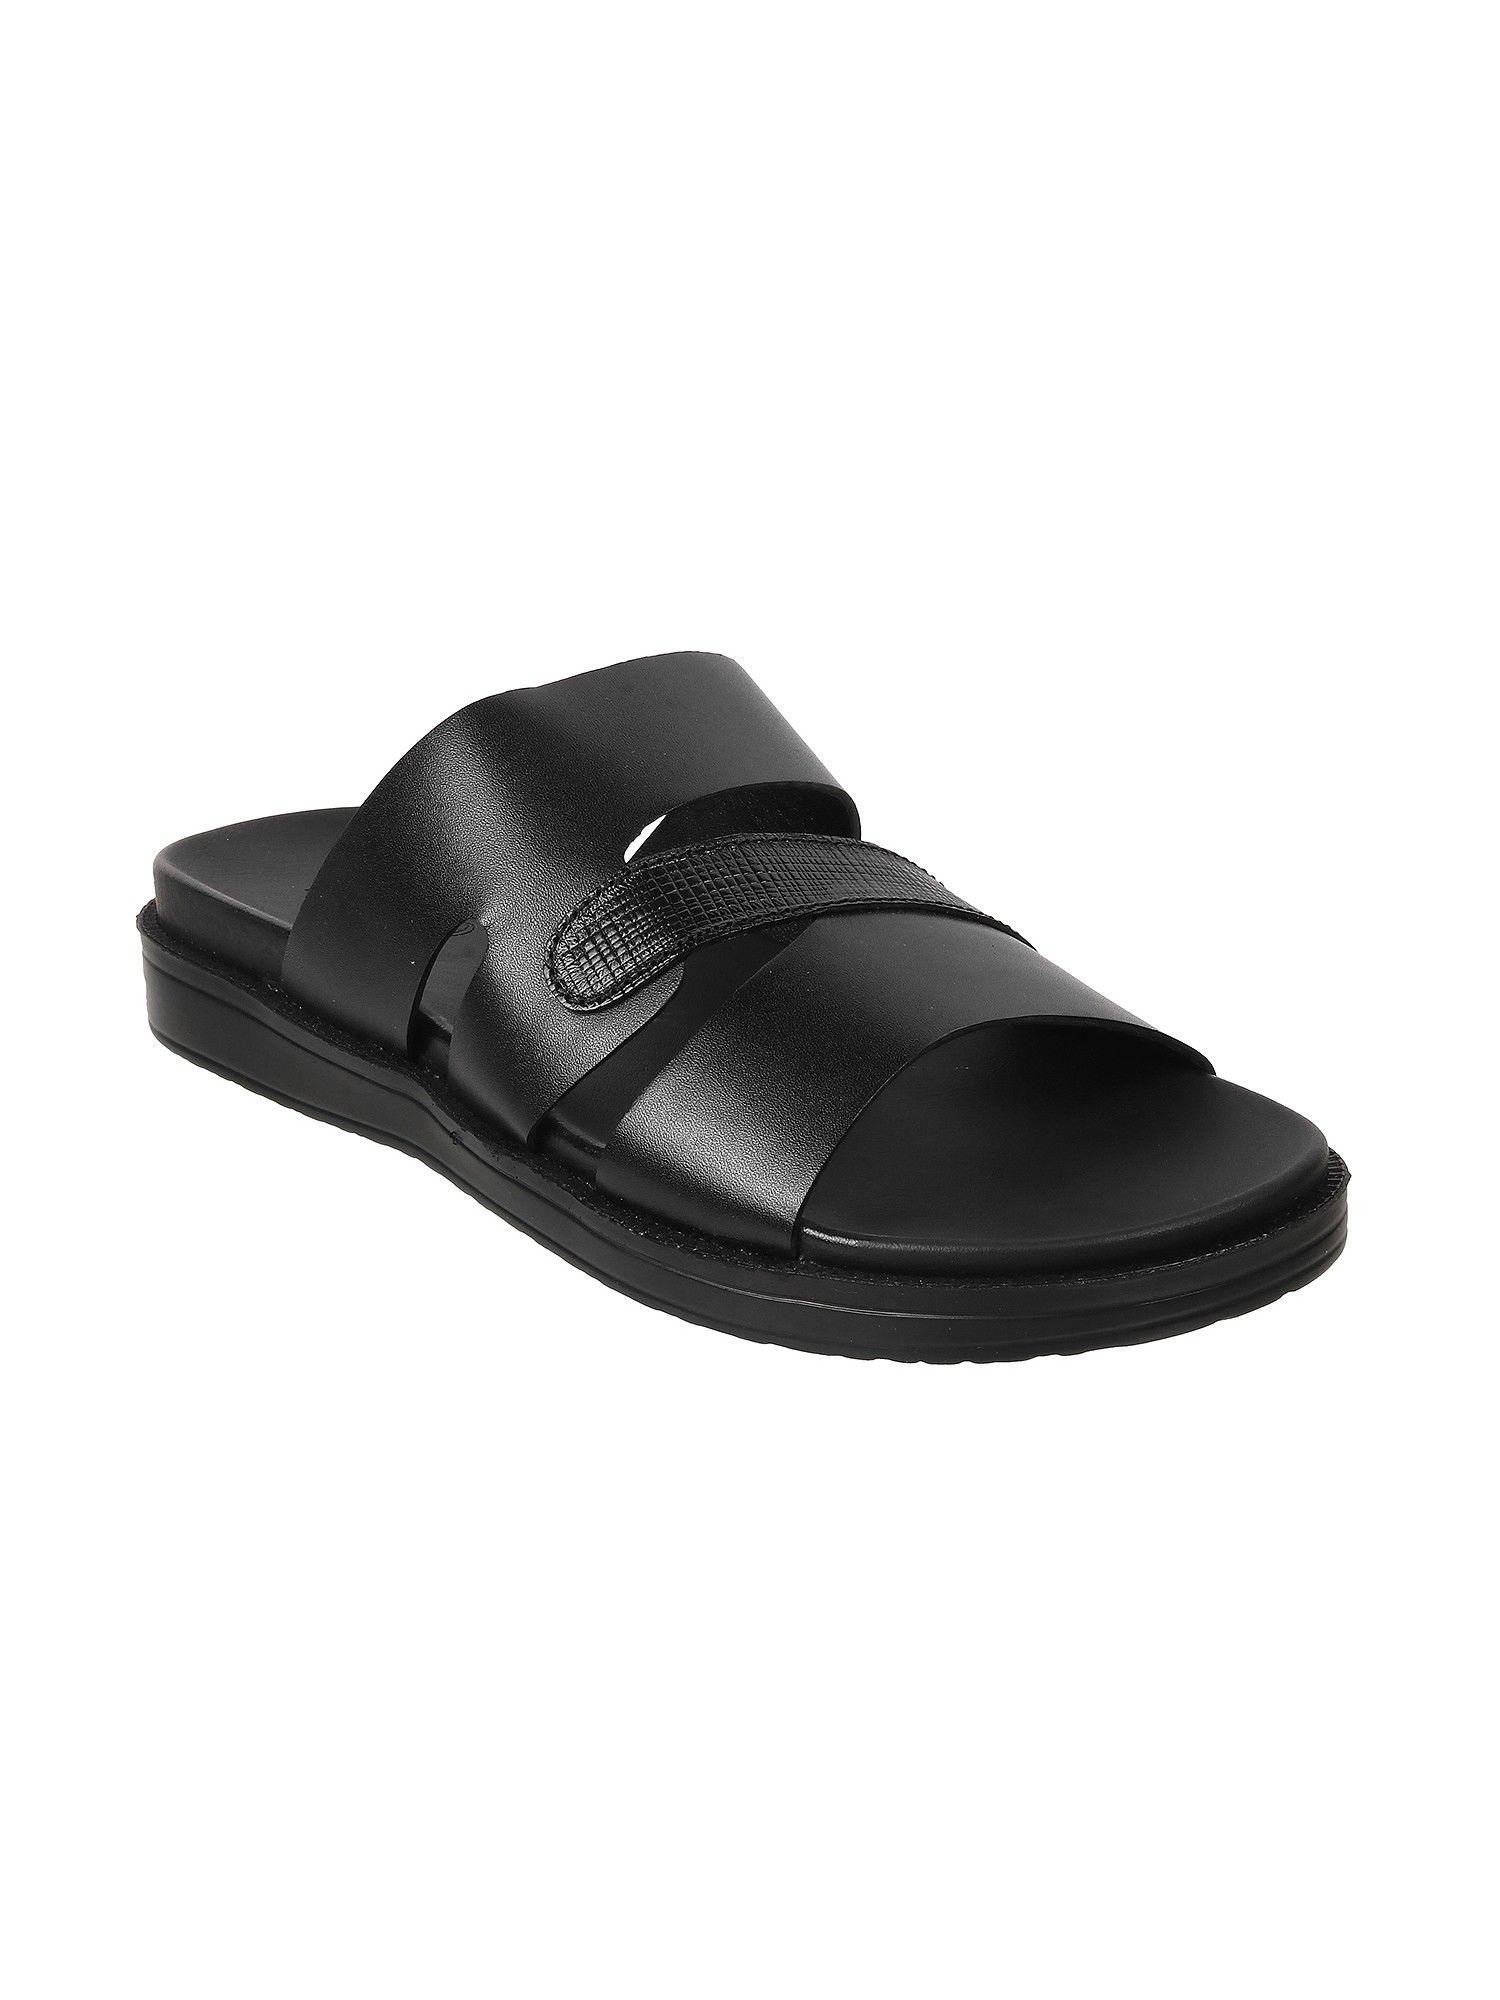 Mens Black Synthetic Textured Sandals